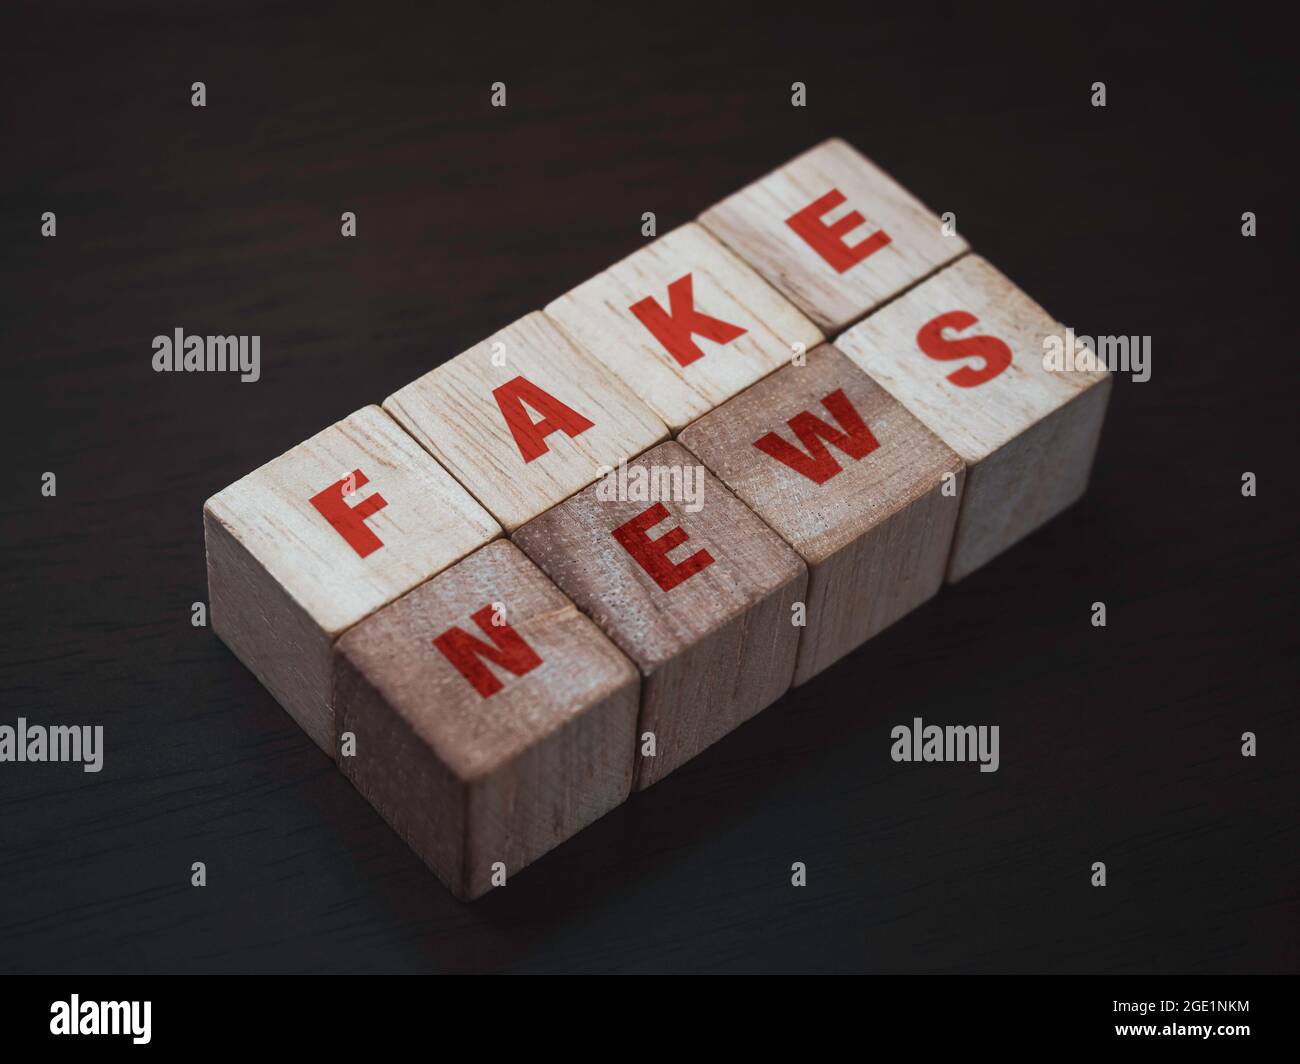 Fake news, red words on wooden cube block on dark background. Fake, discredit, lie, confusion, incite and distortion concept. Stock Photo